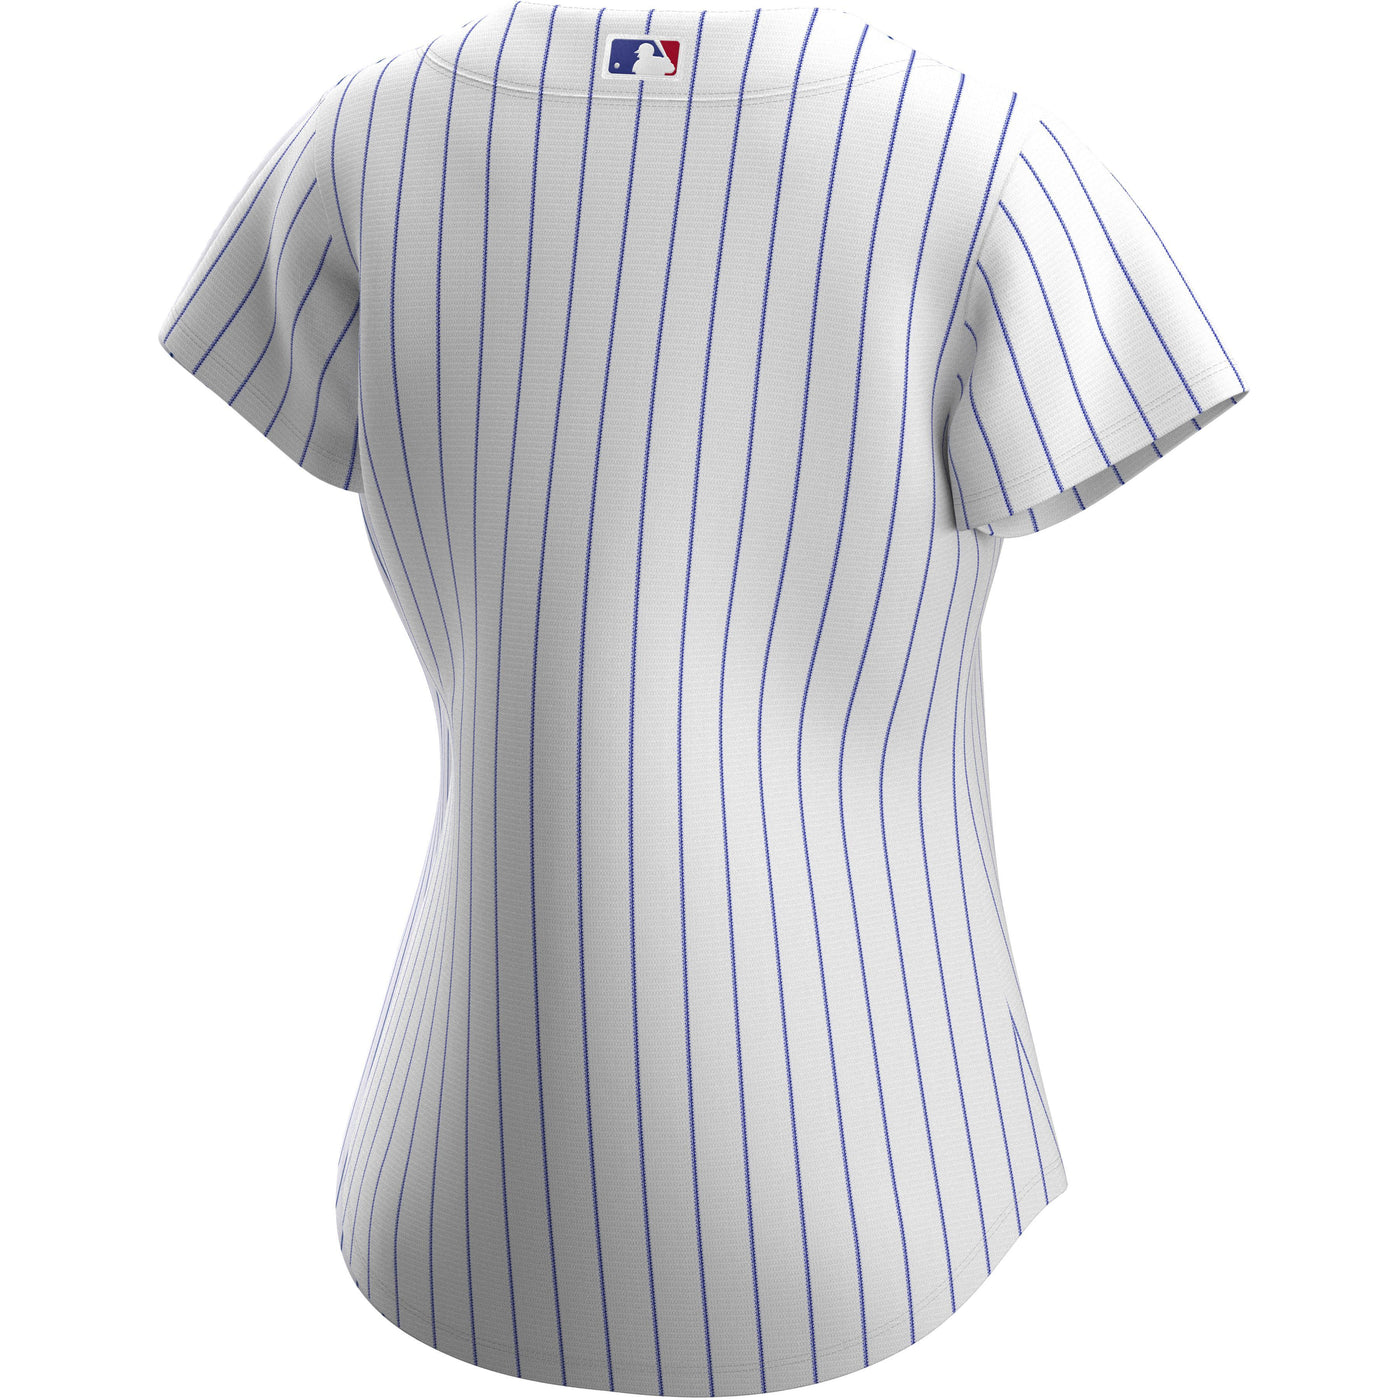 Chicago Cubs Youth Nike Custom Home Pinstripe Replica Jersey